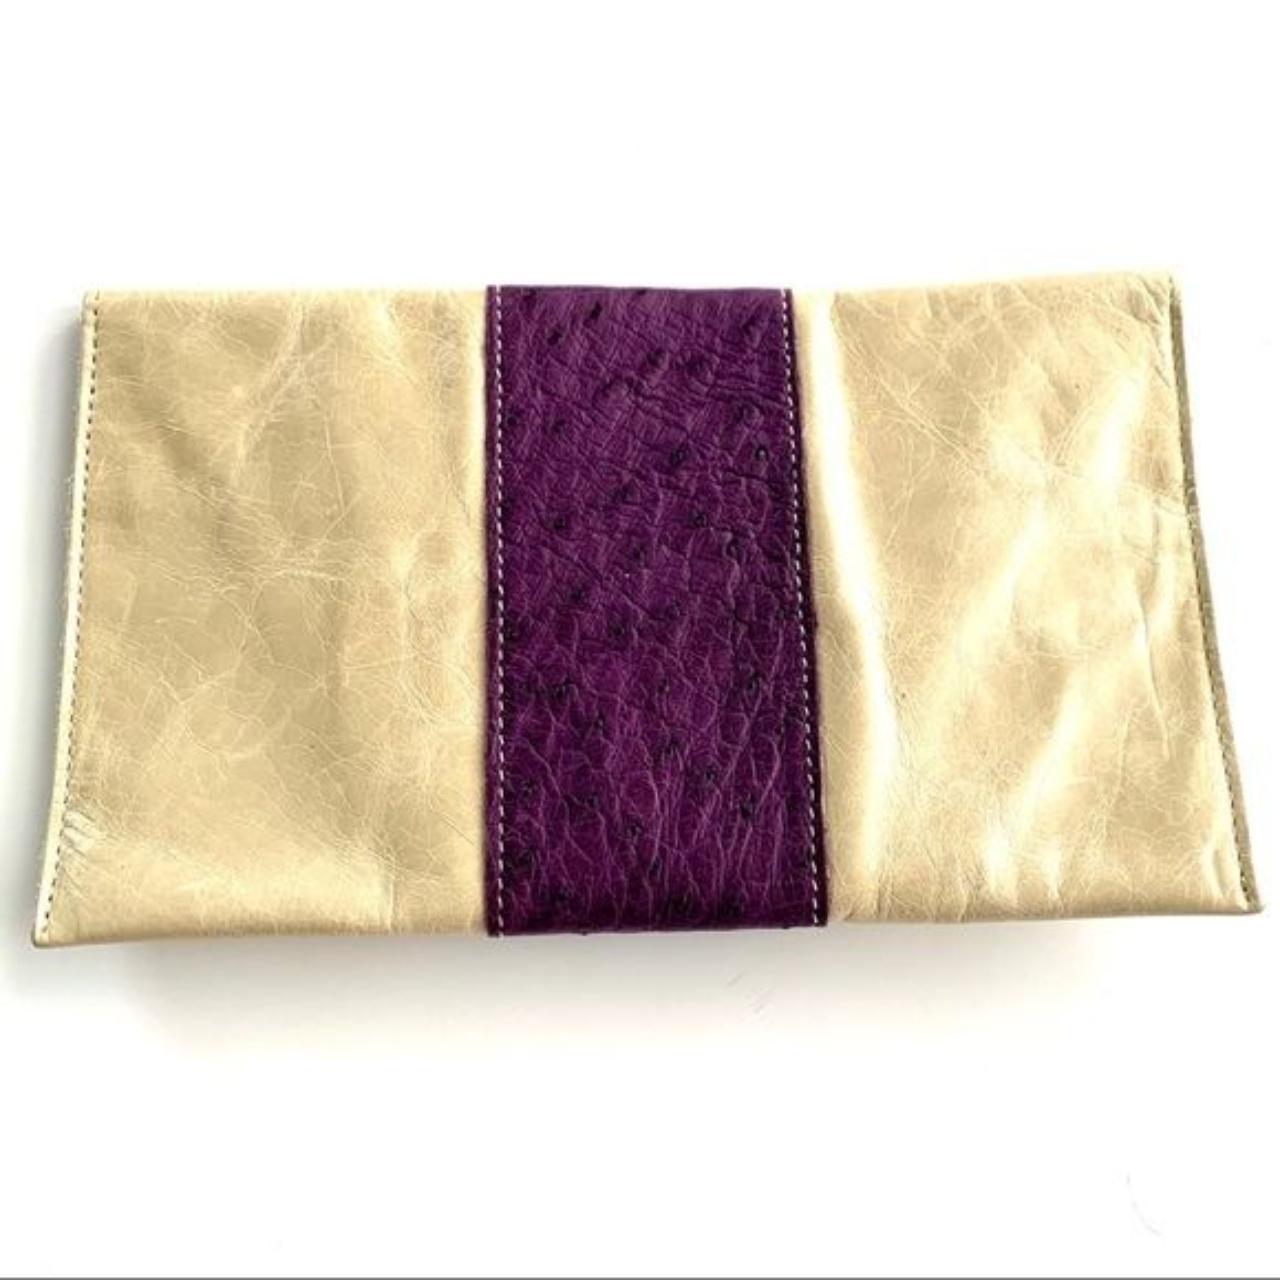 Product Image 3 - Post- Luxury Accessories Leather Clutch

Soft